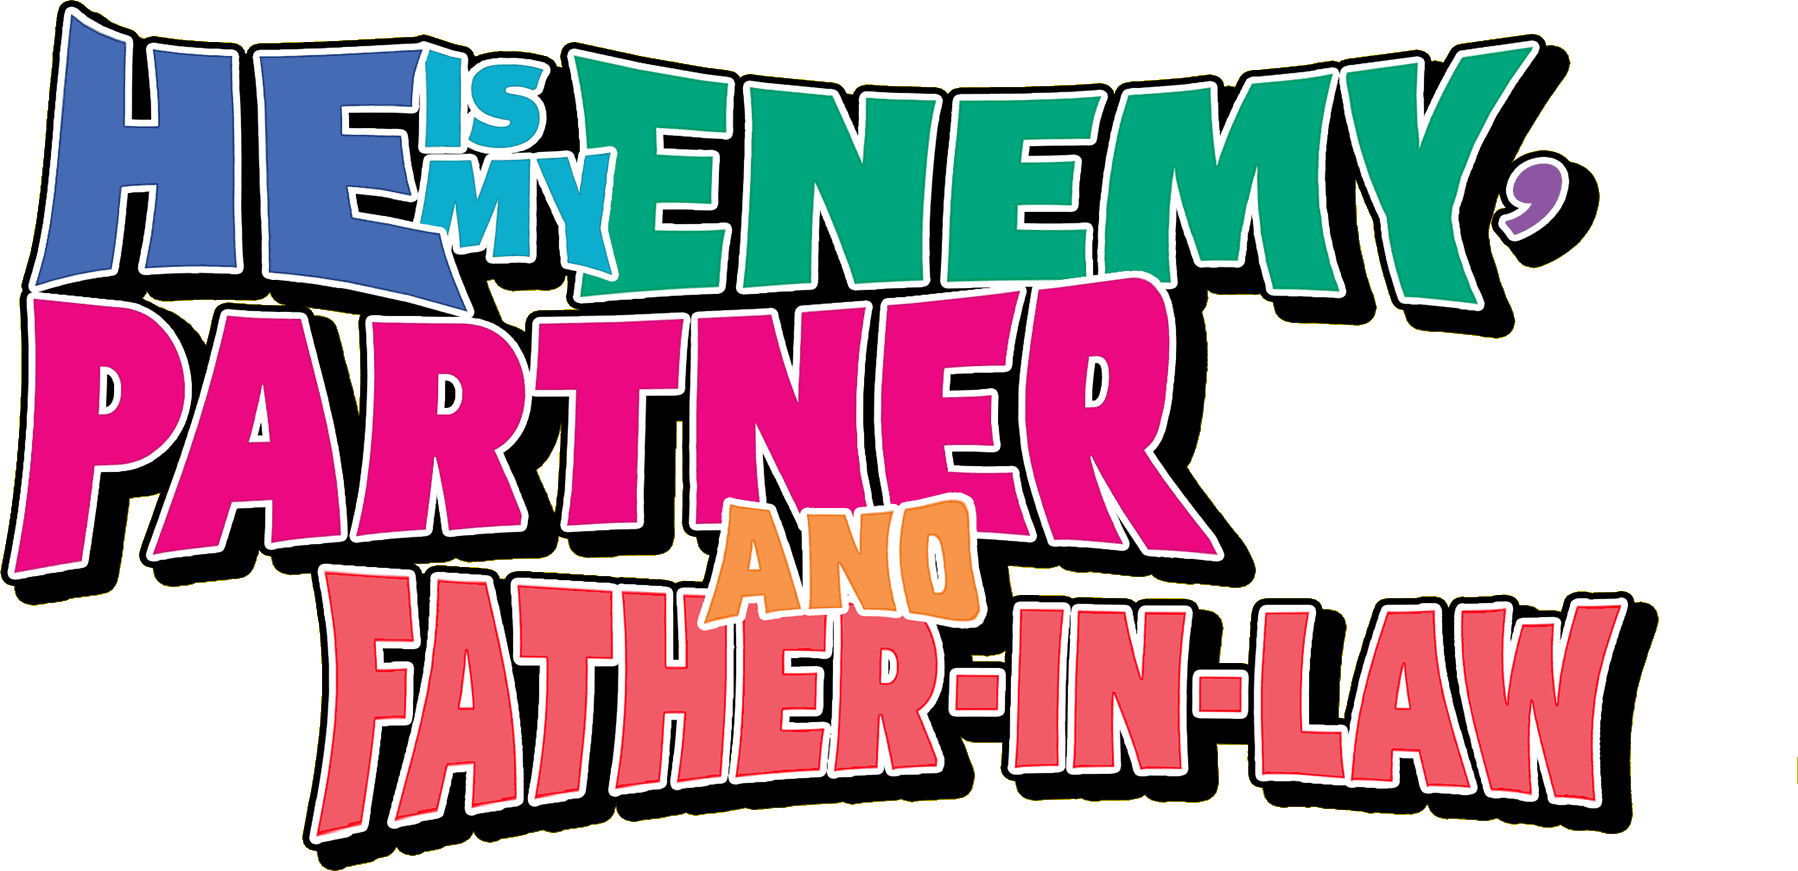 He is My Enemy, Partner and Father-In-Law logo